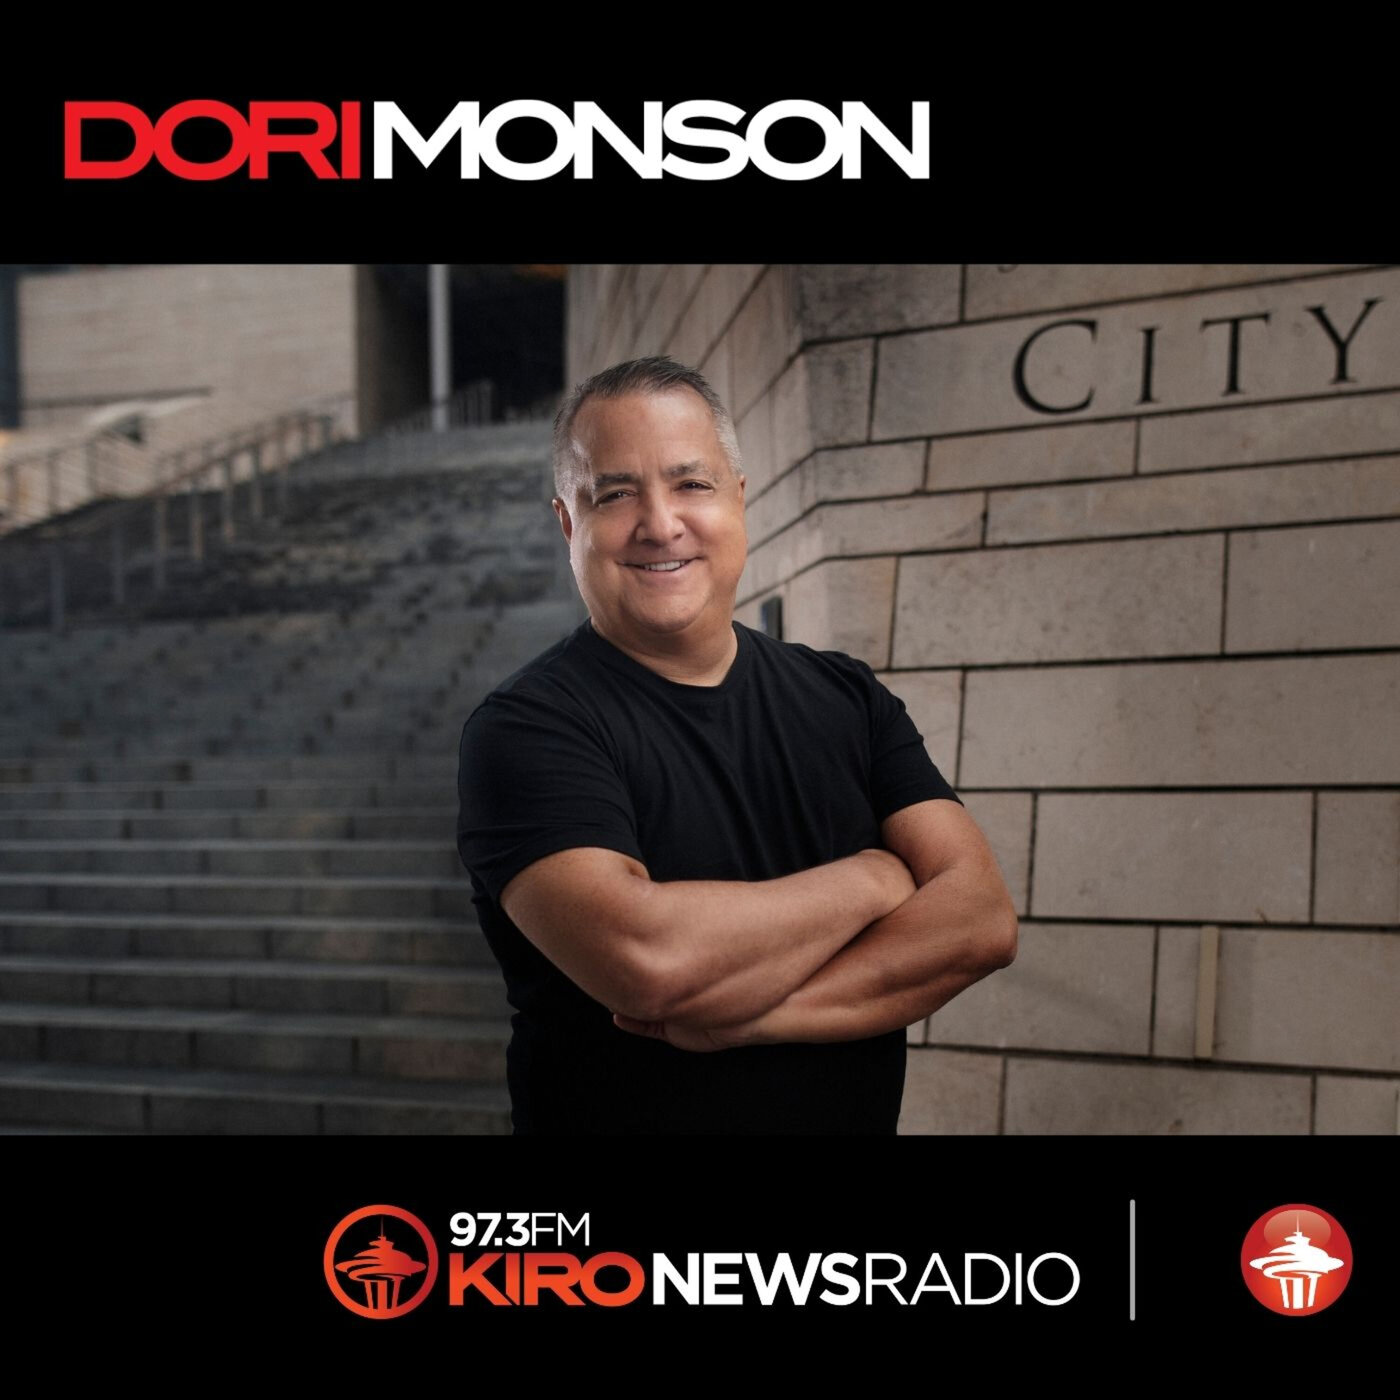 The Very Best of the Dori Monson Show, Day 2: Hour 2